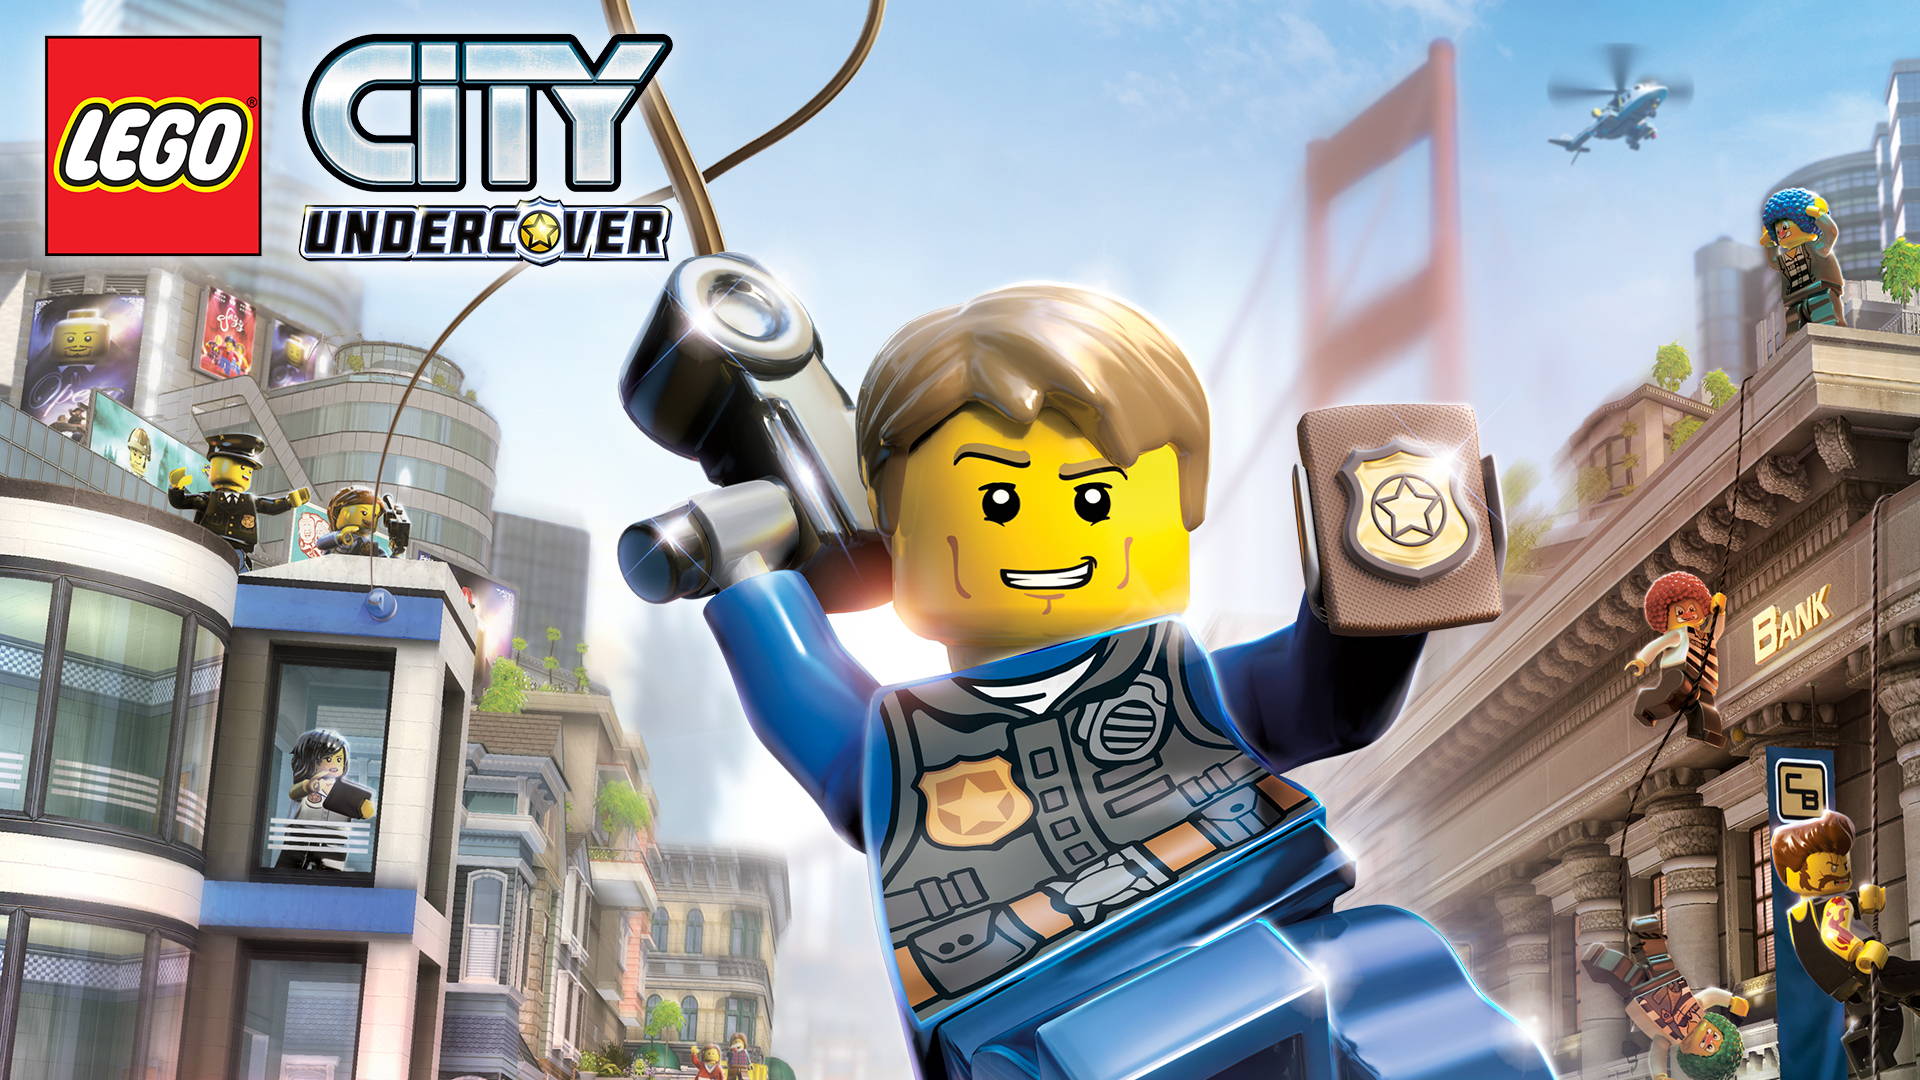 LEGO City Undercover game